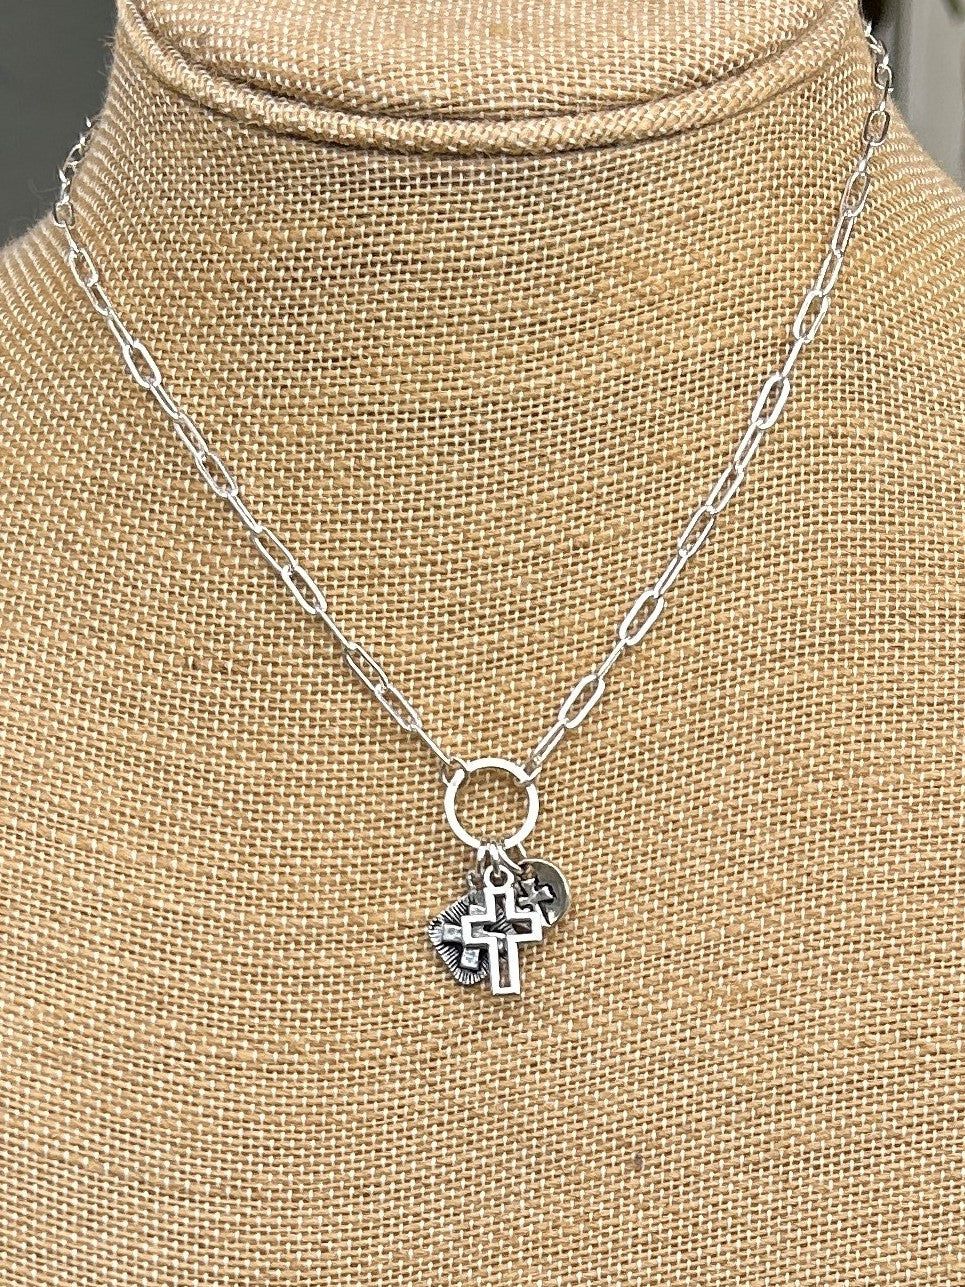 This Elongated Chain Necklace with Triple Cross Drop is perfect for any occasion. Crafted in silver, the necklace features elongated chain links and three unique and different cross drops, spanning between 17-19' in length. Add a hint of sophistication to your style with this special piece.